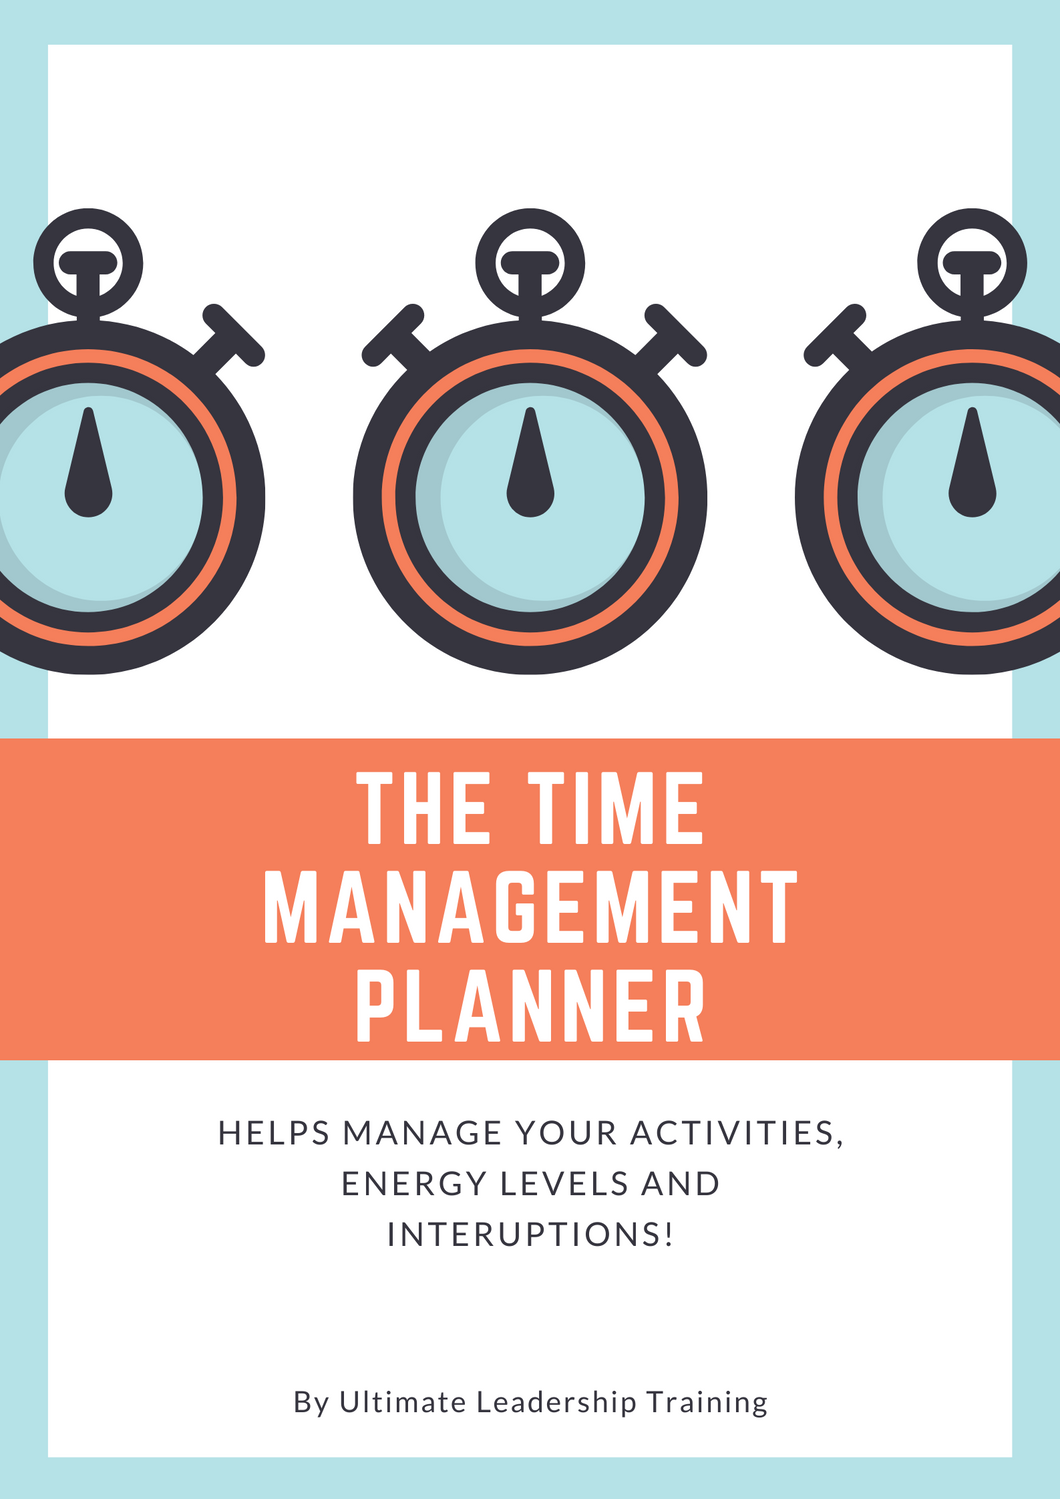 The ultimate time management planner and time management skills training course training activity 